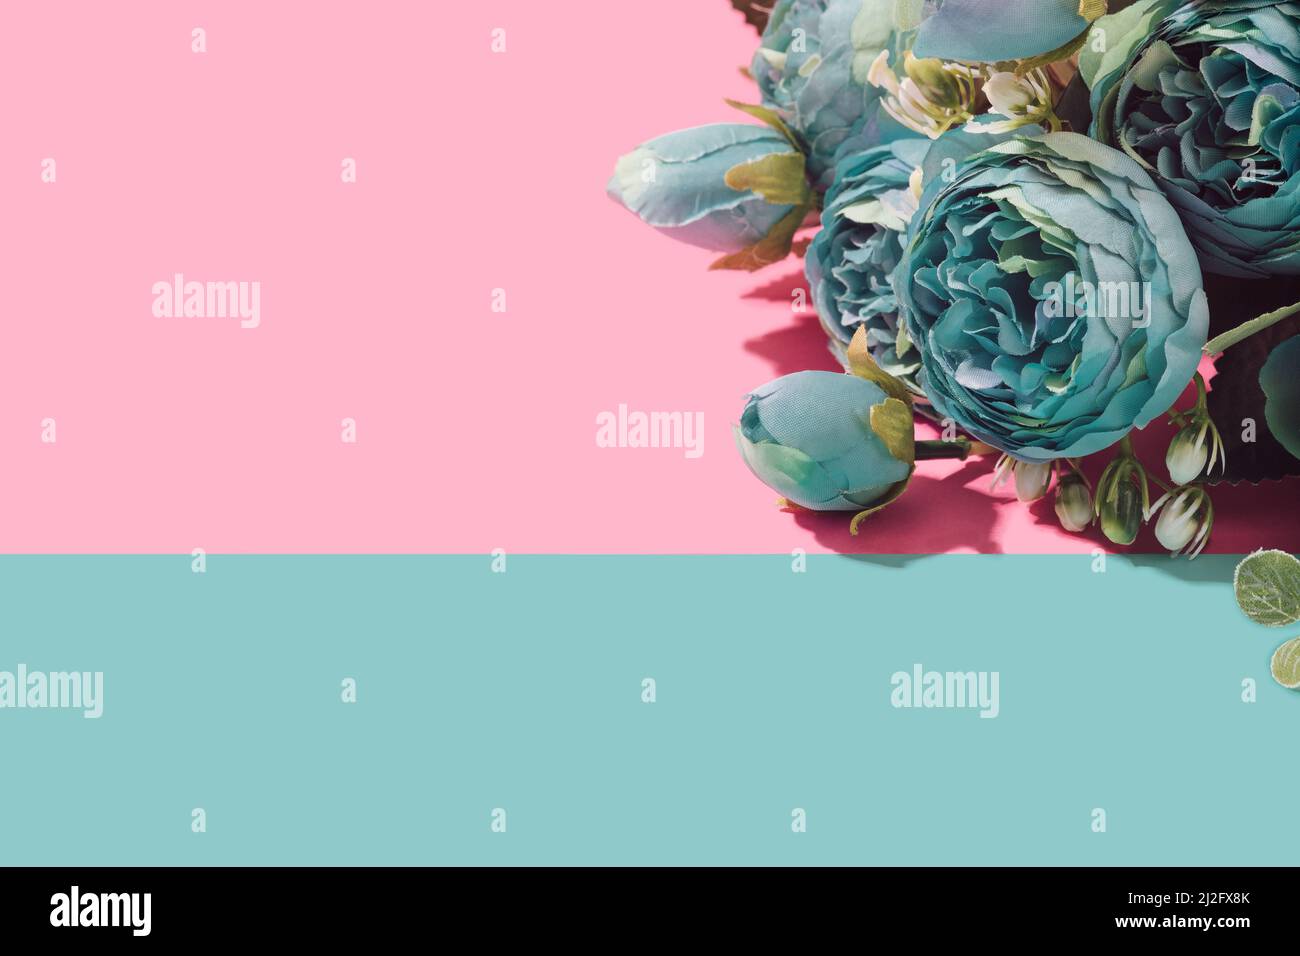 Artificial flowers bouquet on a blue and pink pastel background. Springtime minimal concept. Stock Photo